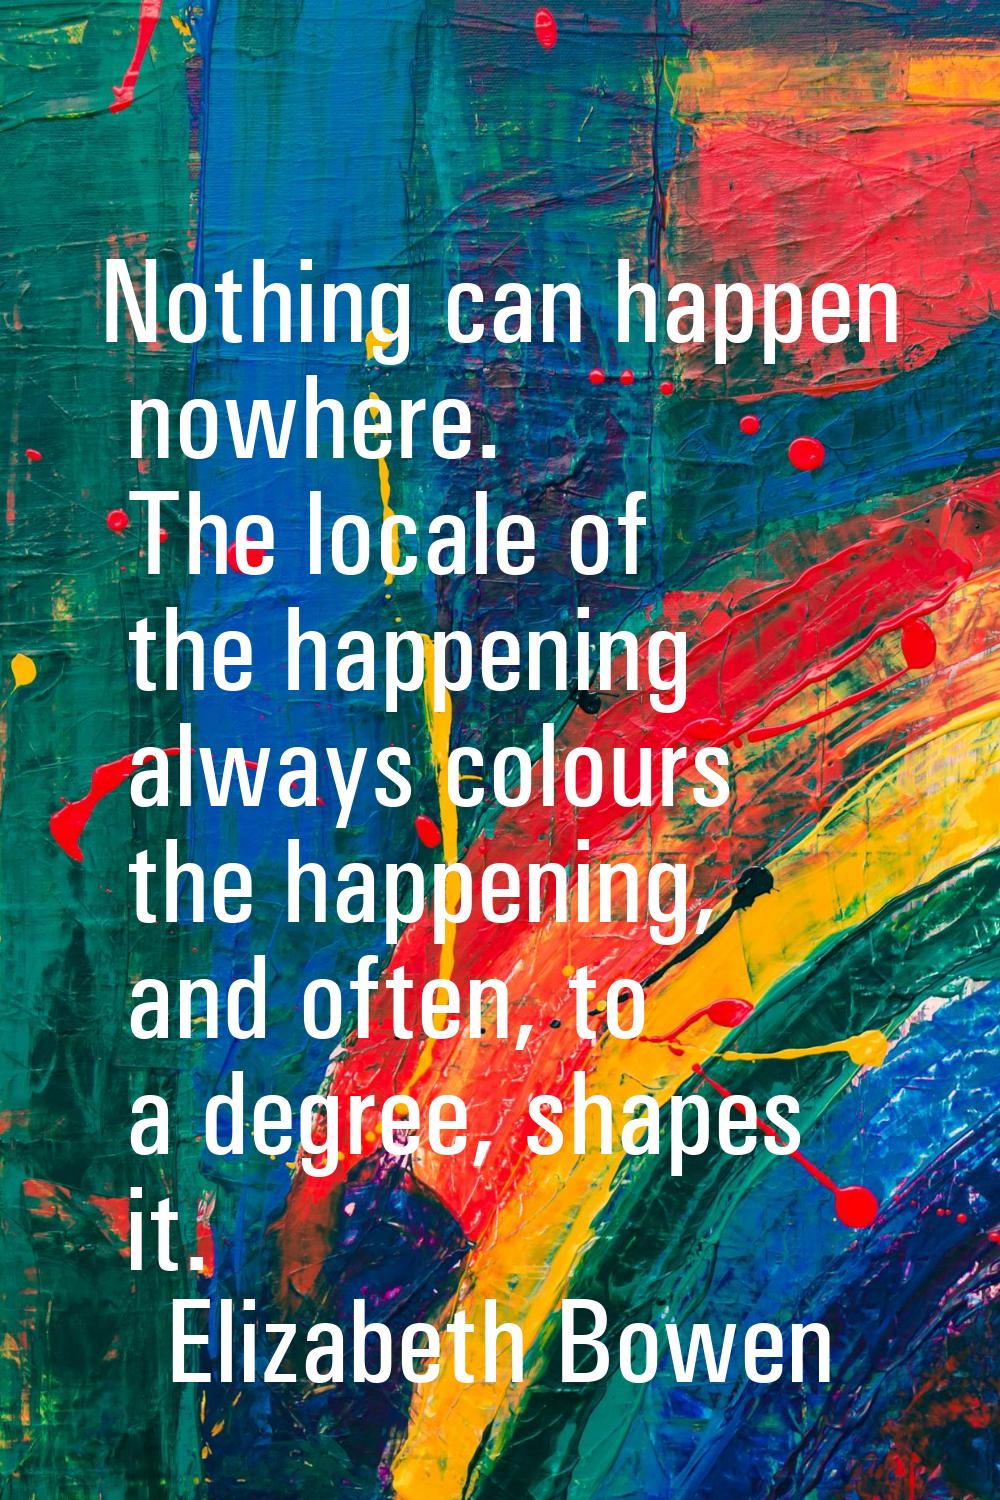 Nothing can happen nowhere. The locale of the happening always colours the happening, and often, to